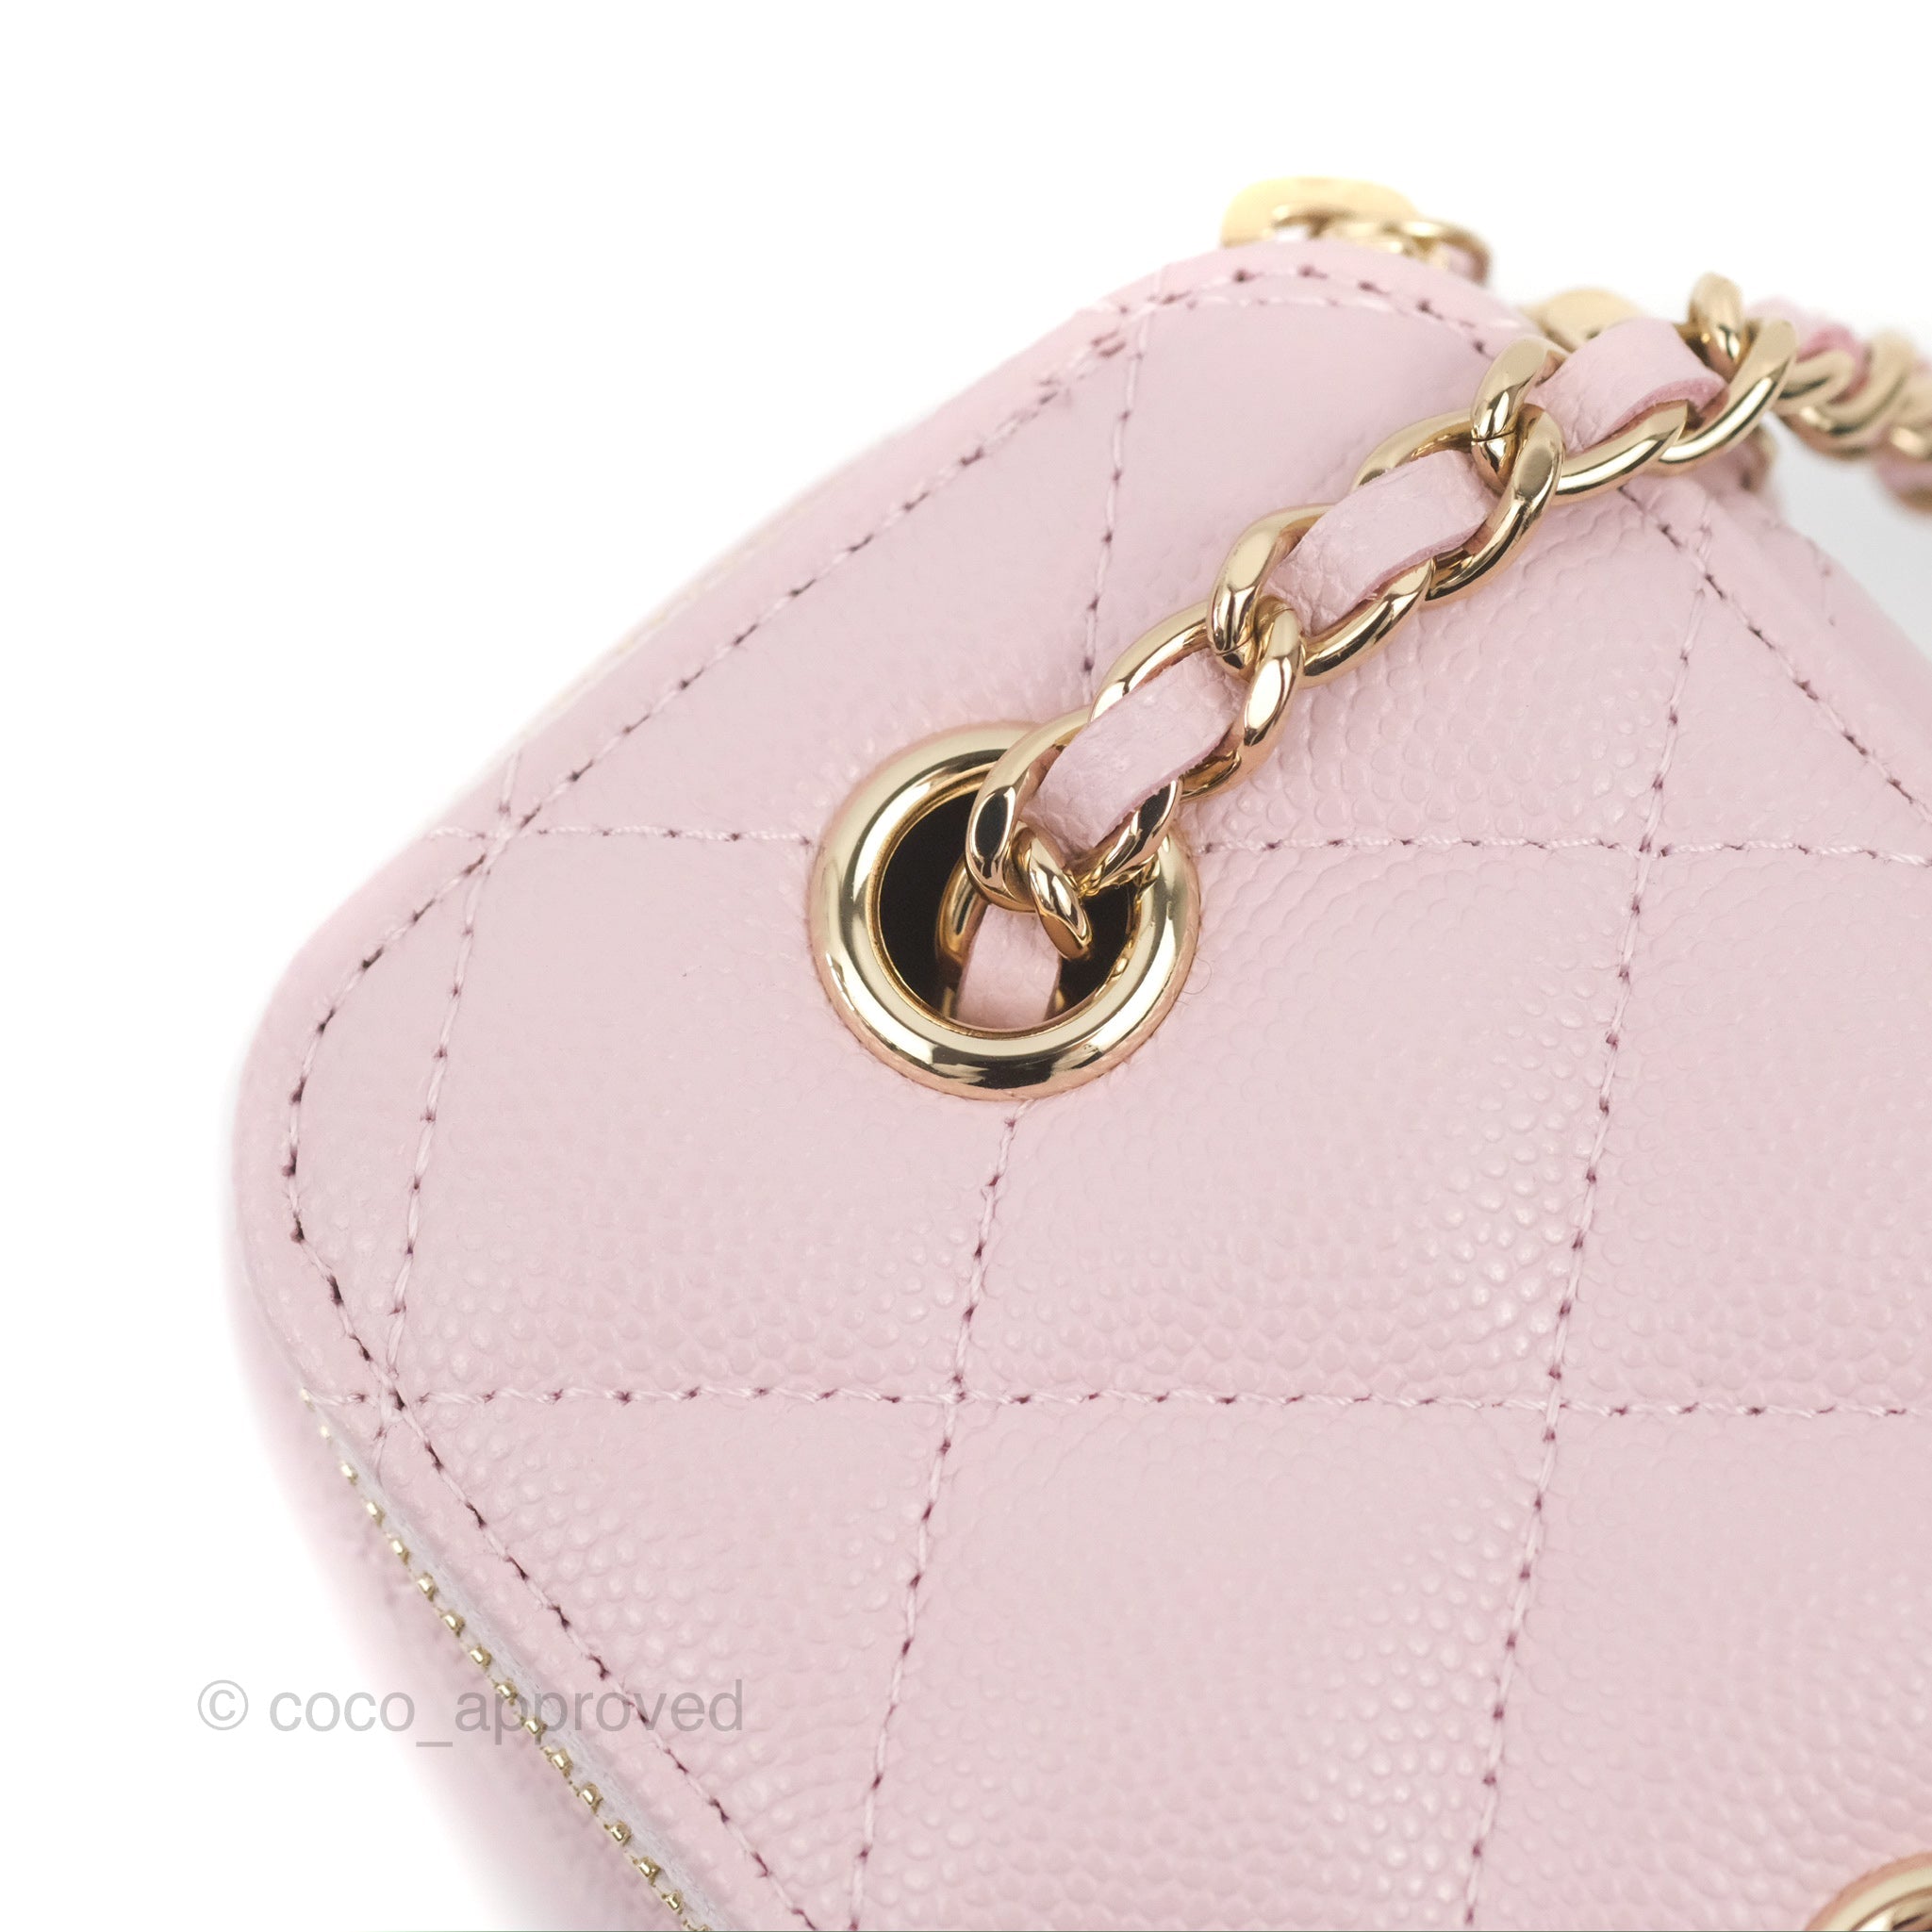 Chanel Mini Vanity With Chain Pink Caviar Gold Hardware – Coco Approved  Studio